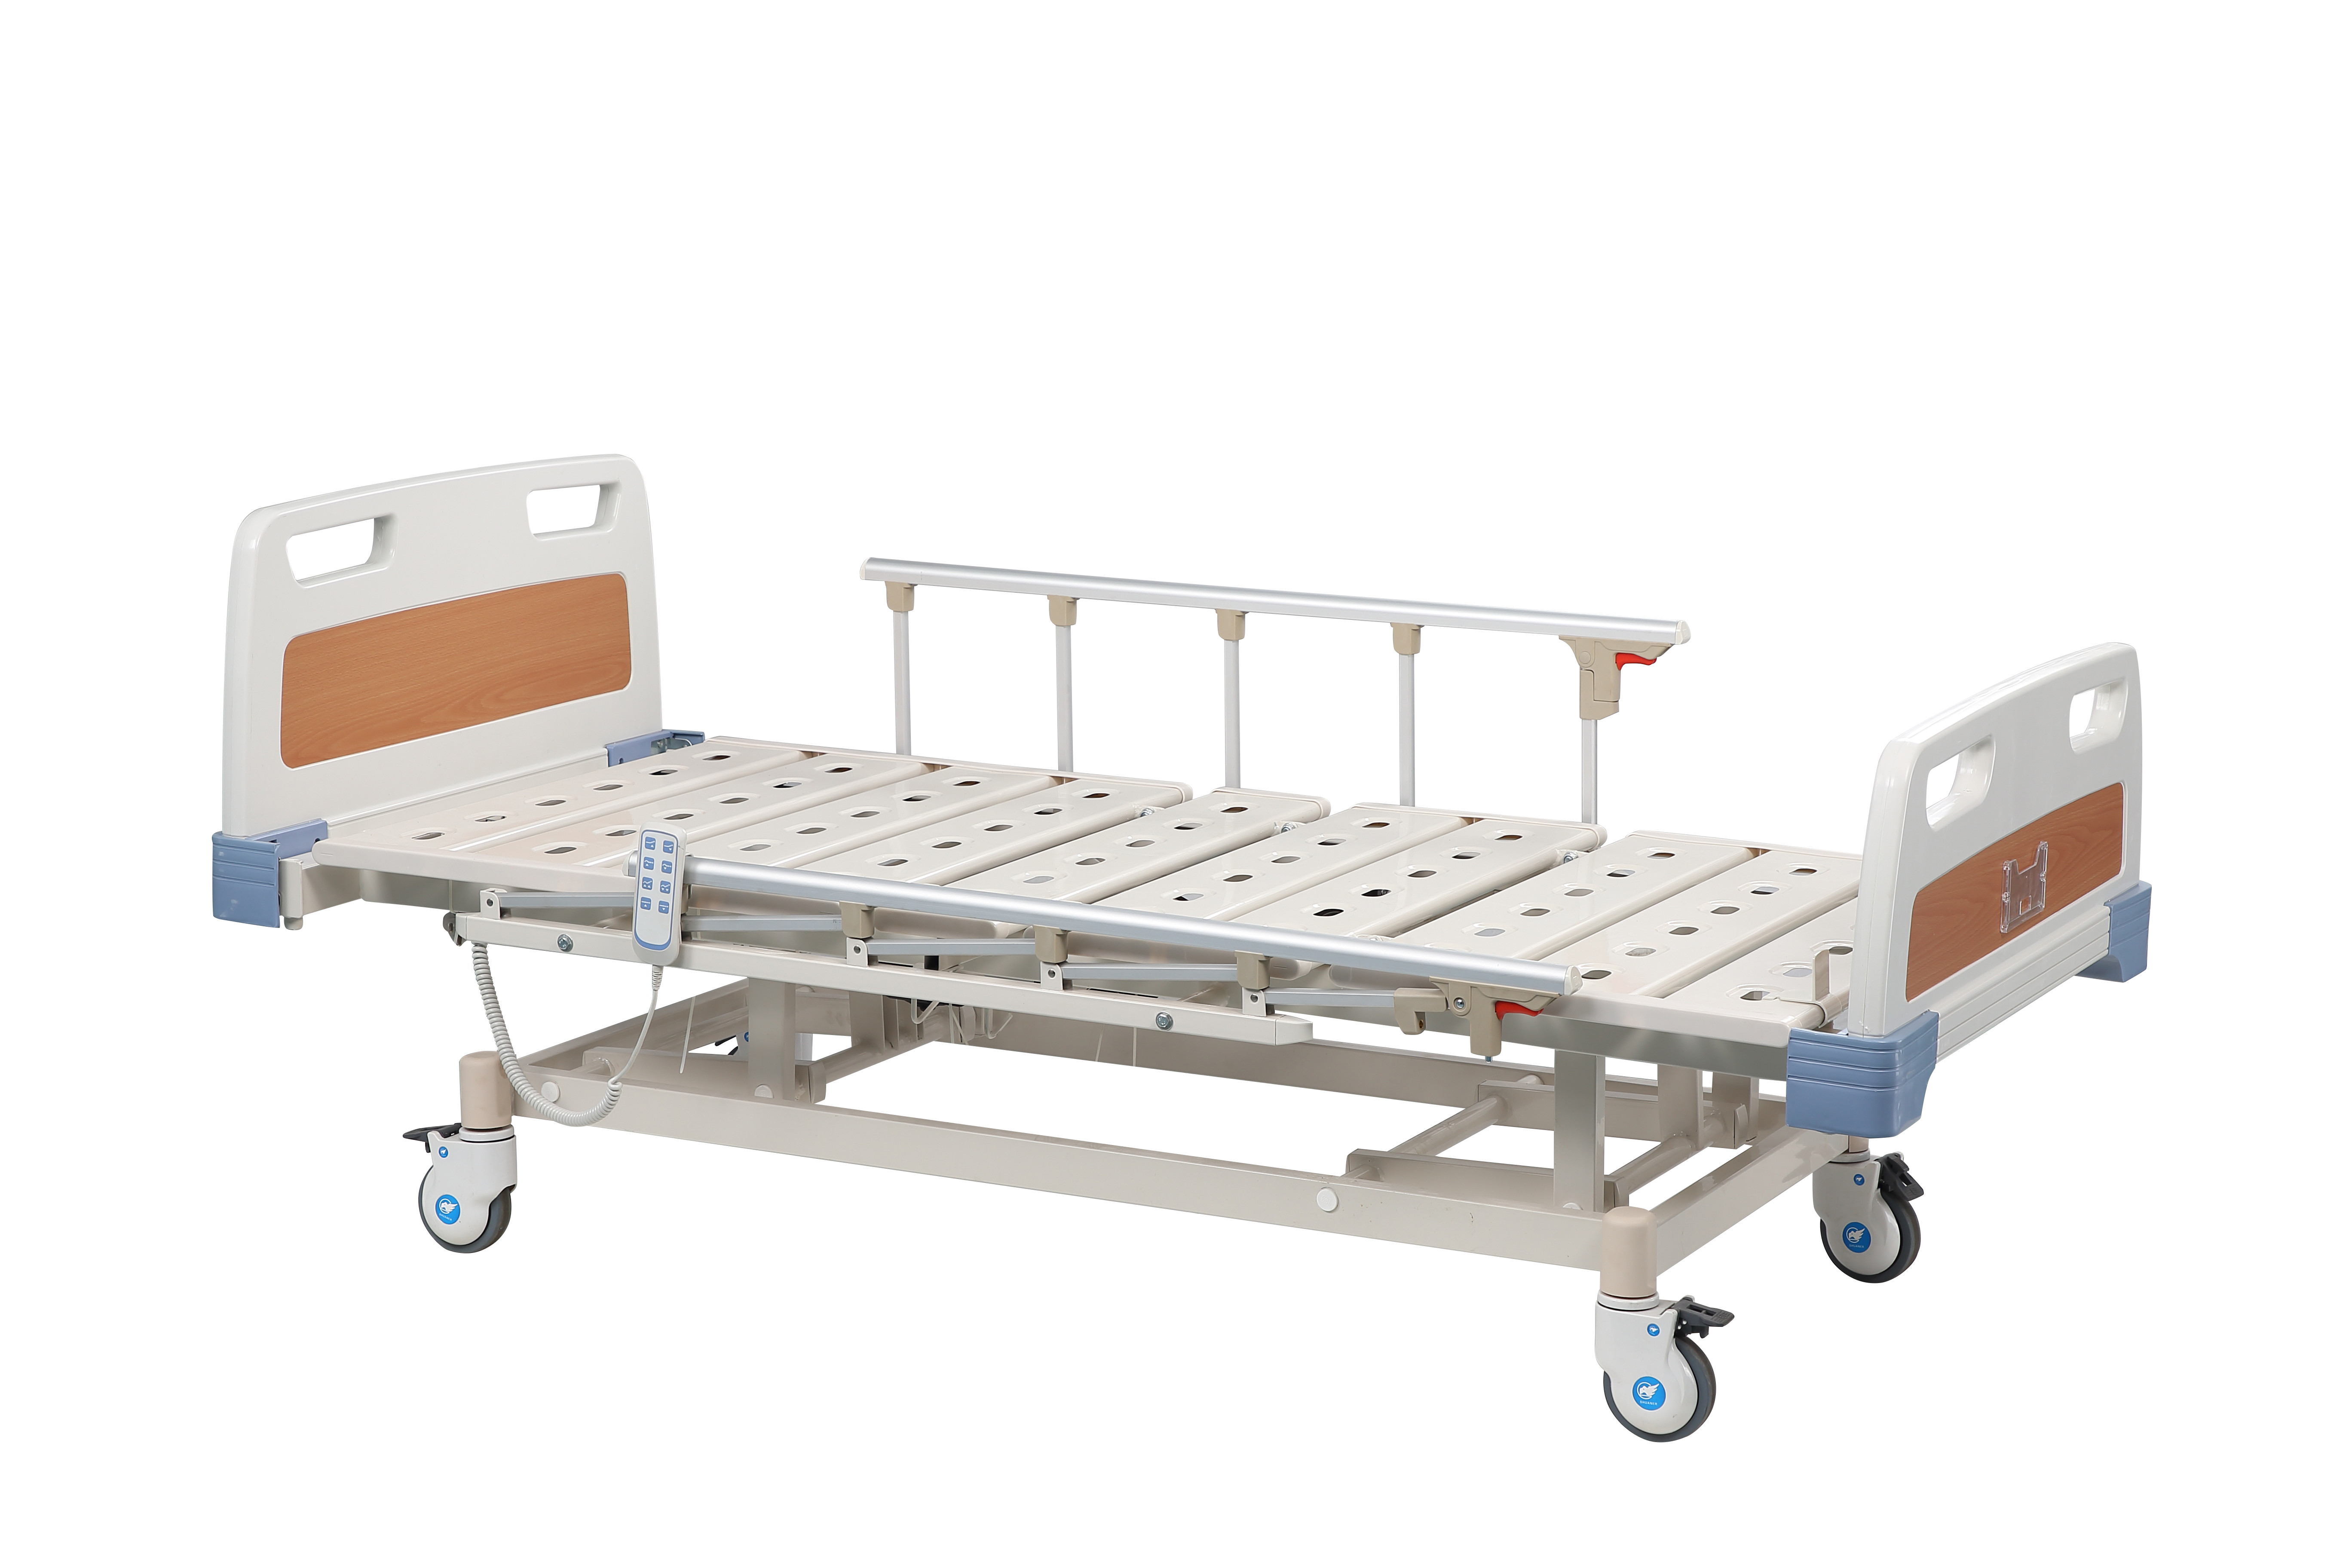 Three Function Manual Hospital Bed OEM With 3 Cranks For ICU With Switch